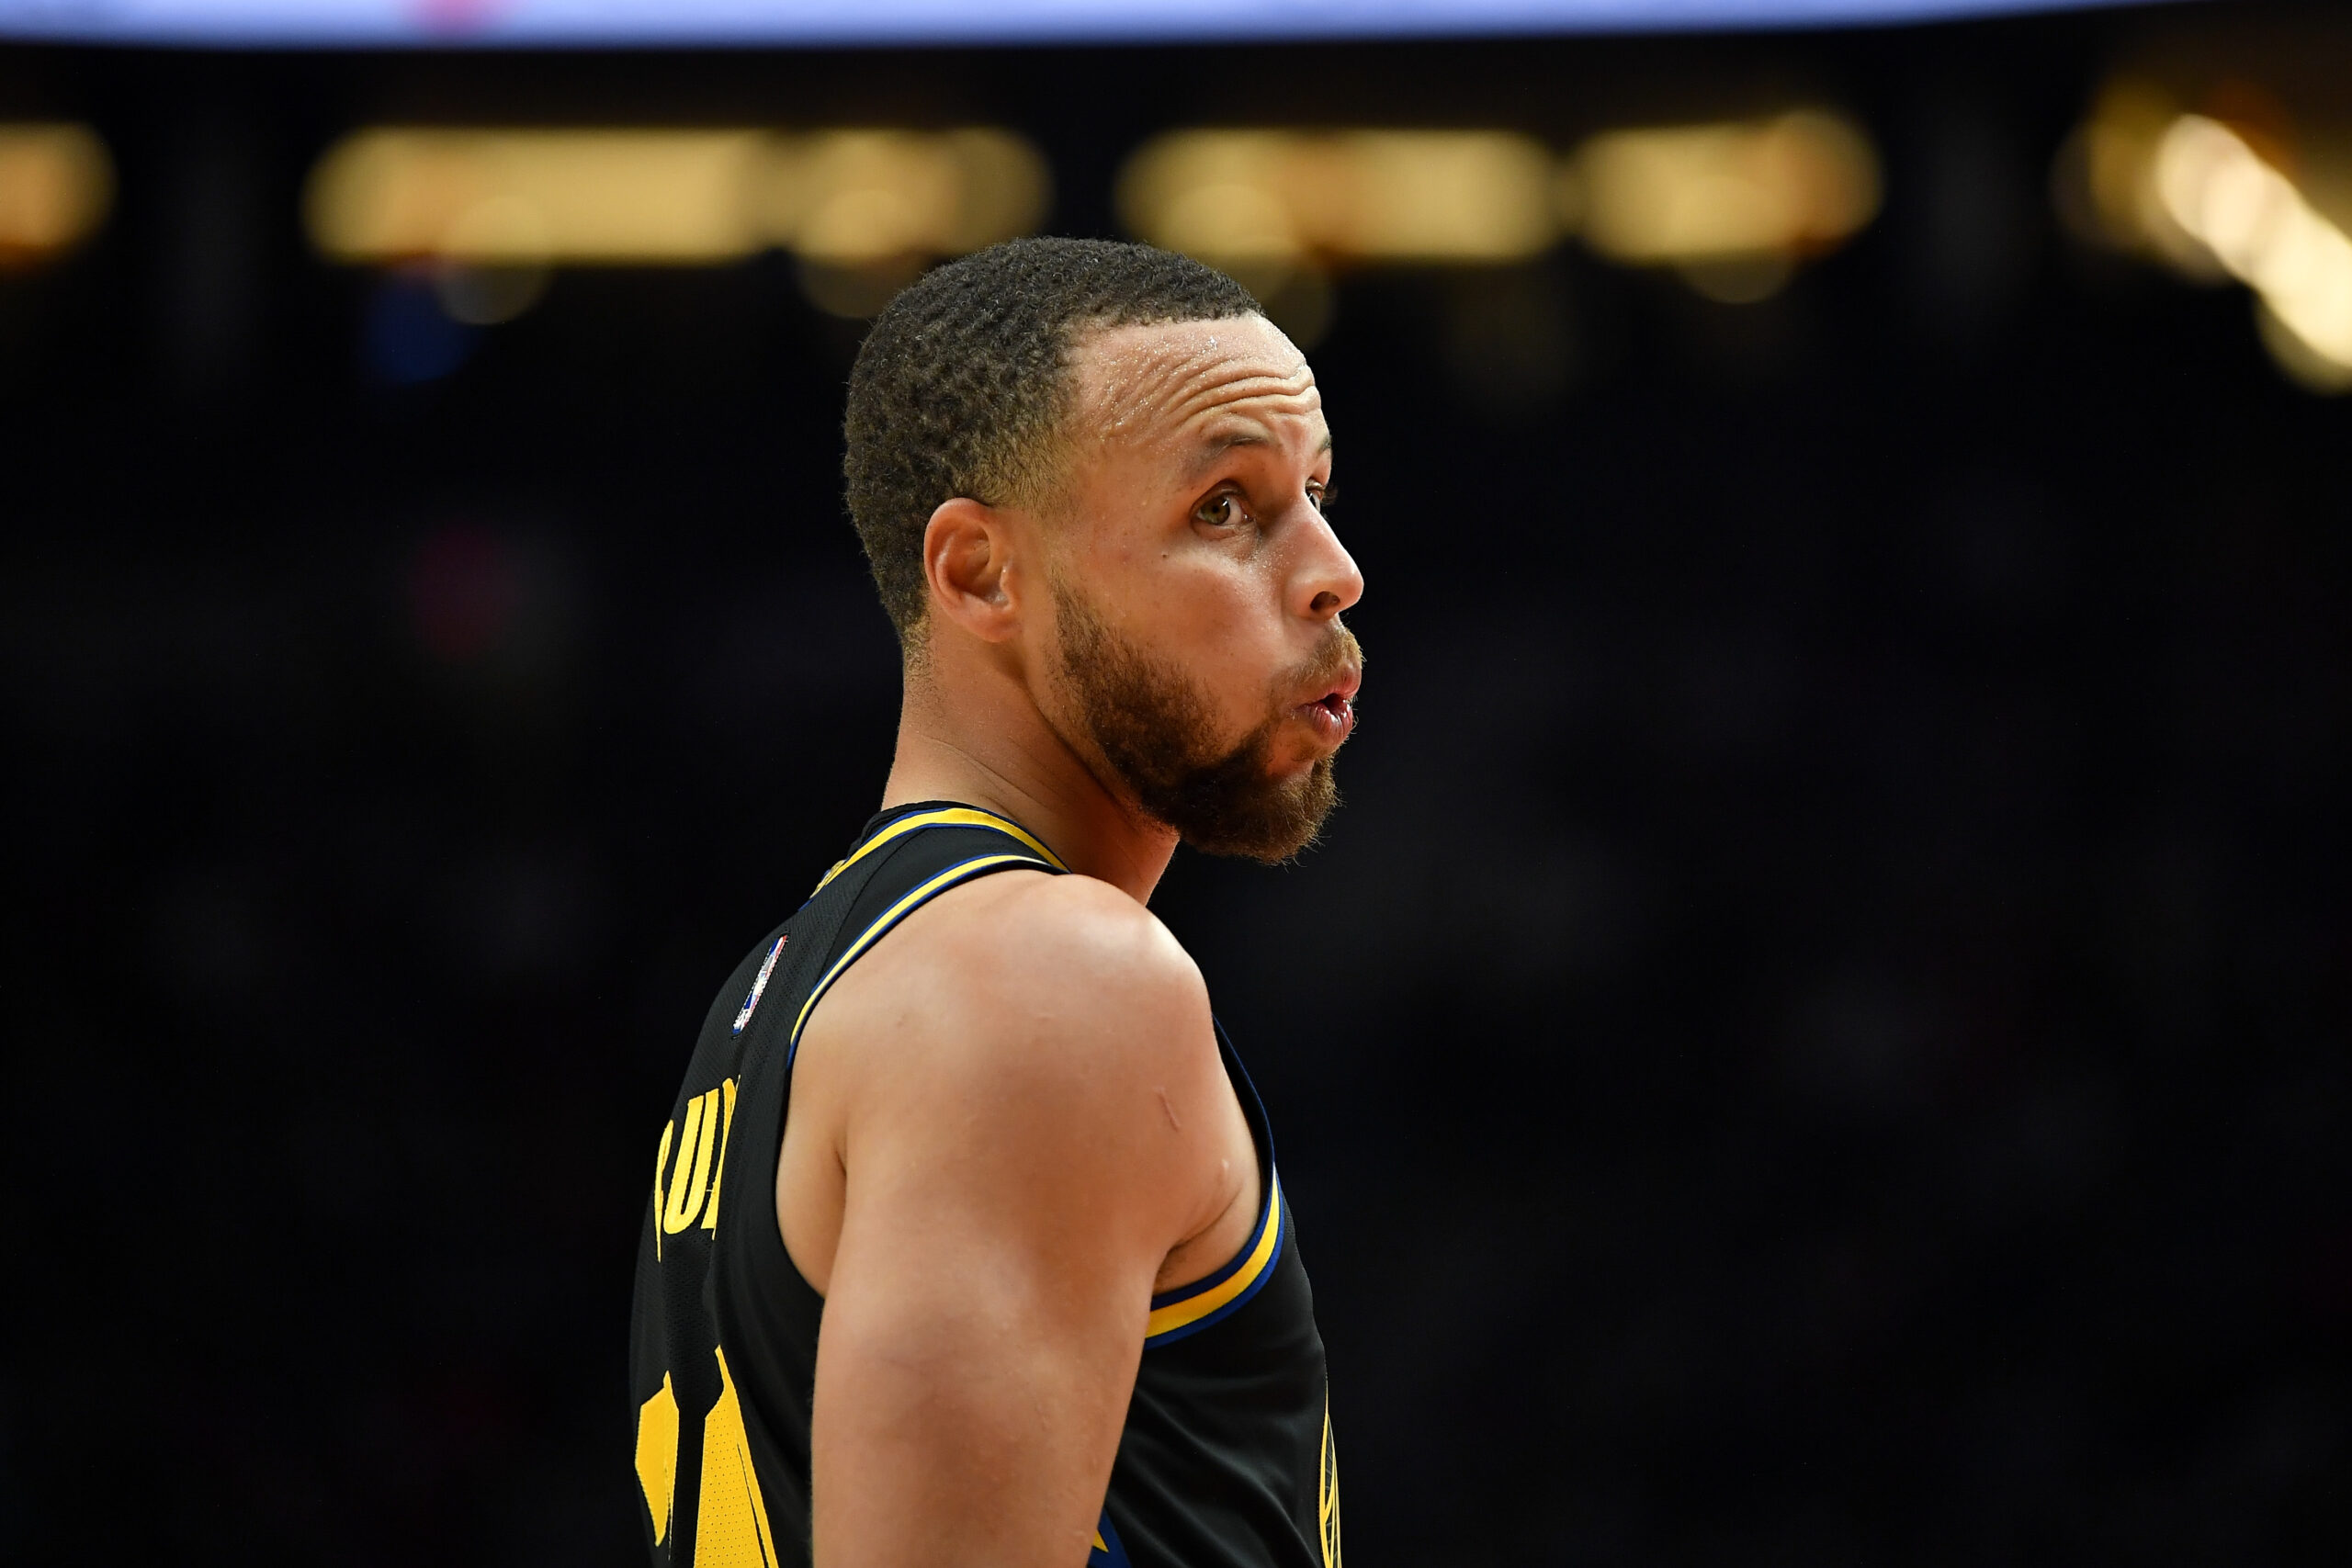 Steph Curry made an incredible shooting warmup look way too easy